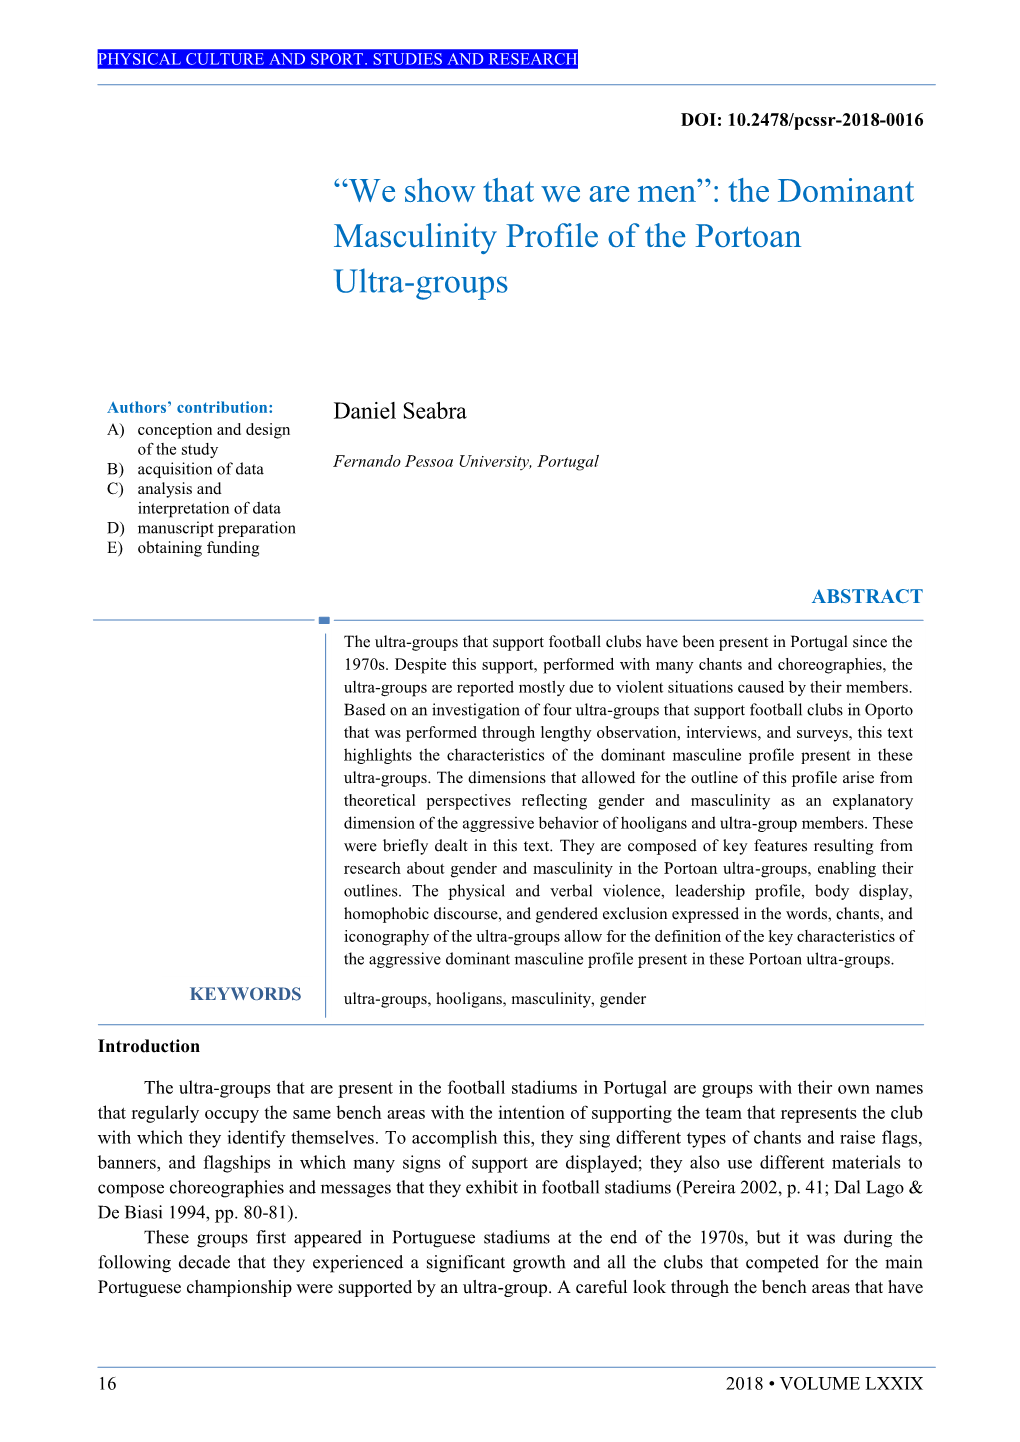 The Dominant Masculinity Profile of the Portoan Ultra-Groups